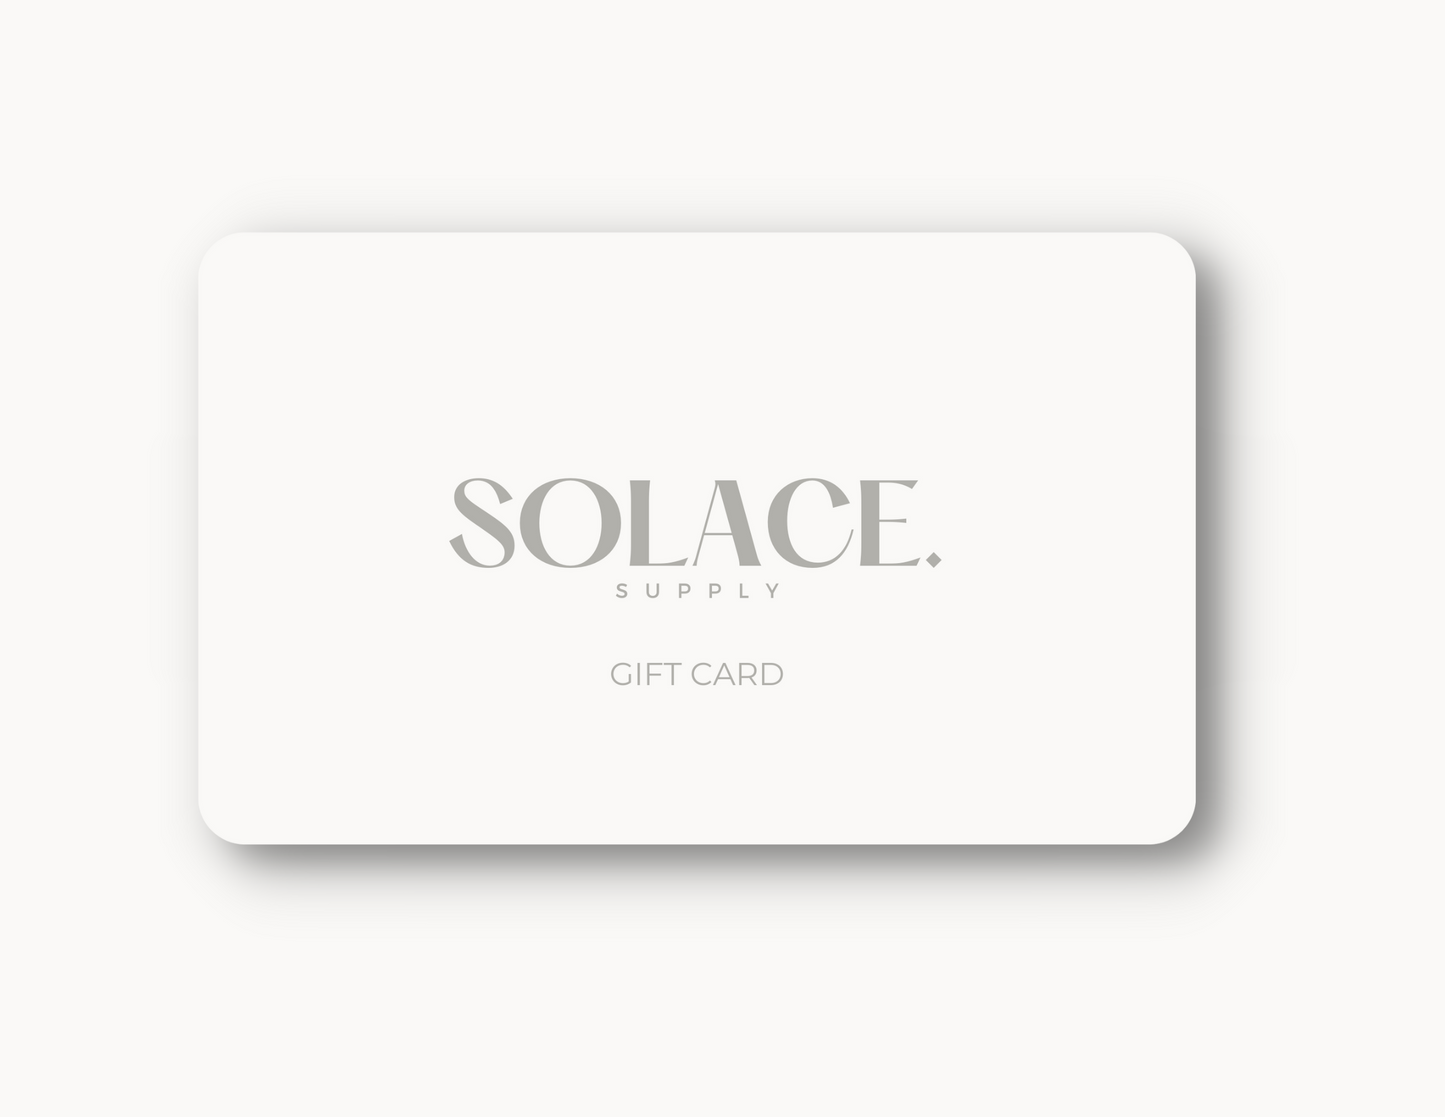 Solace Gift Card